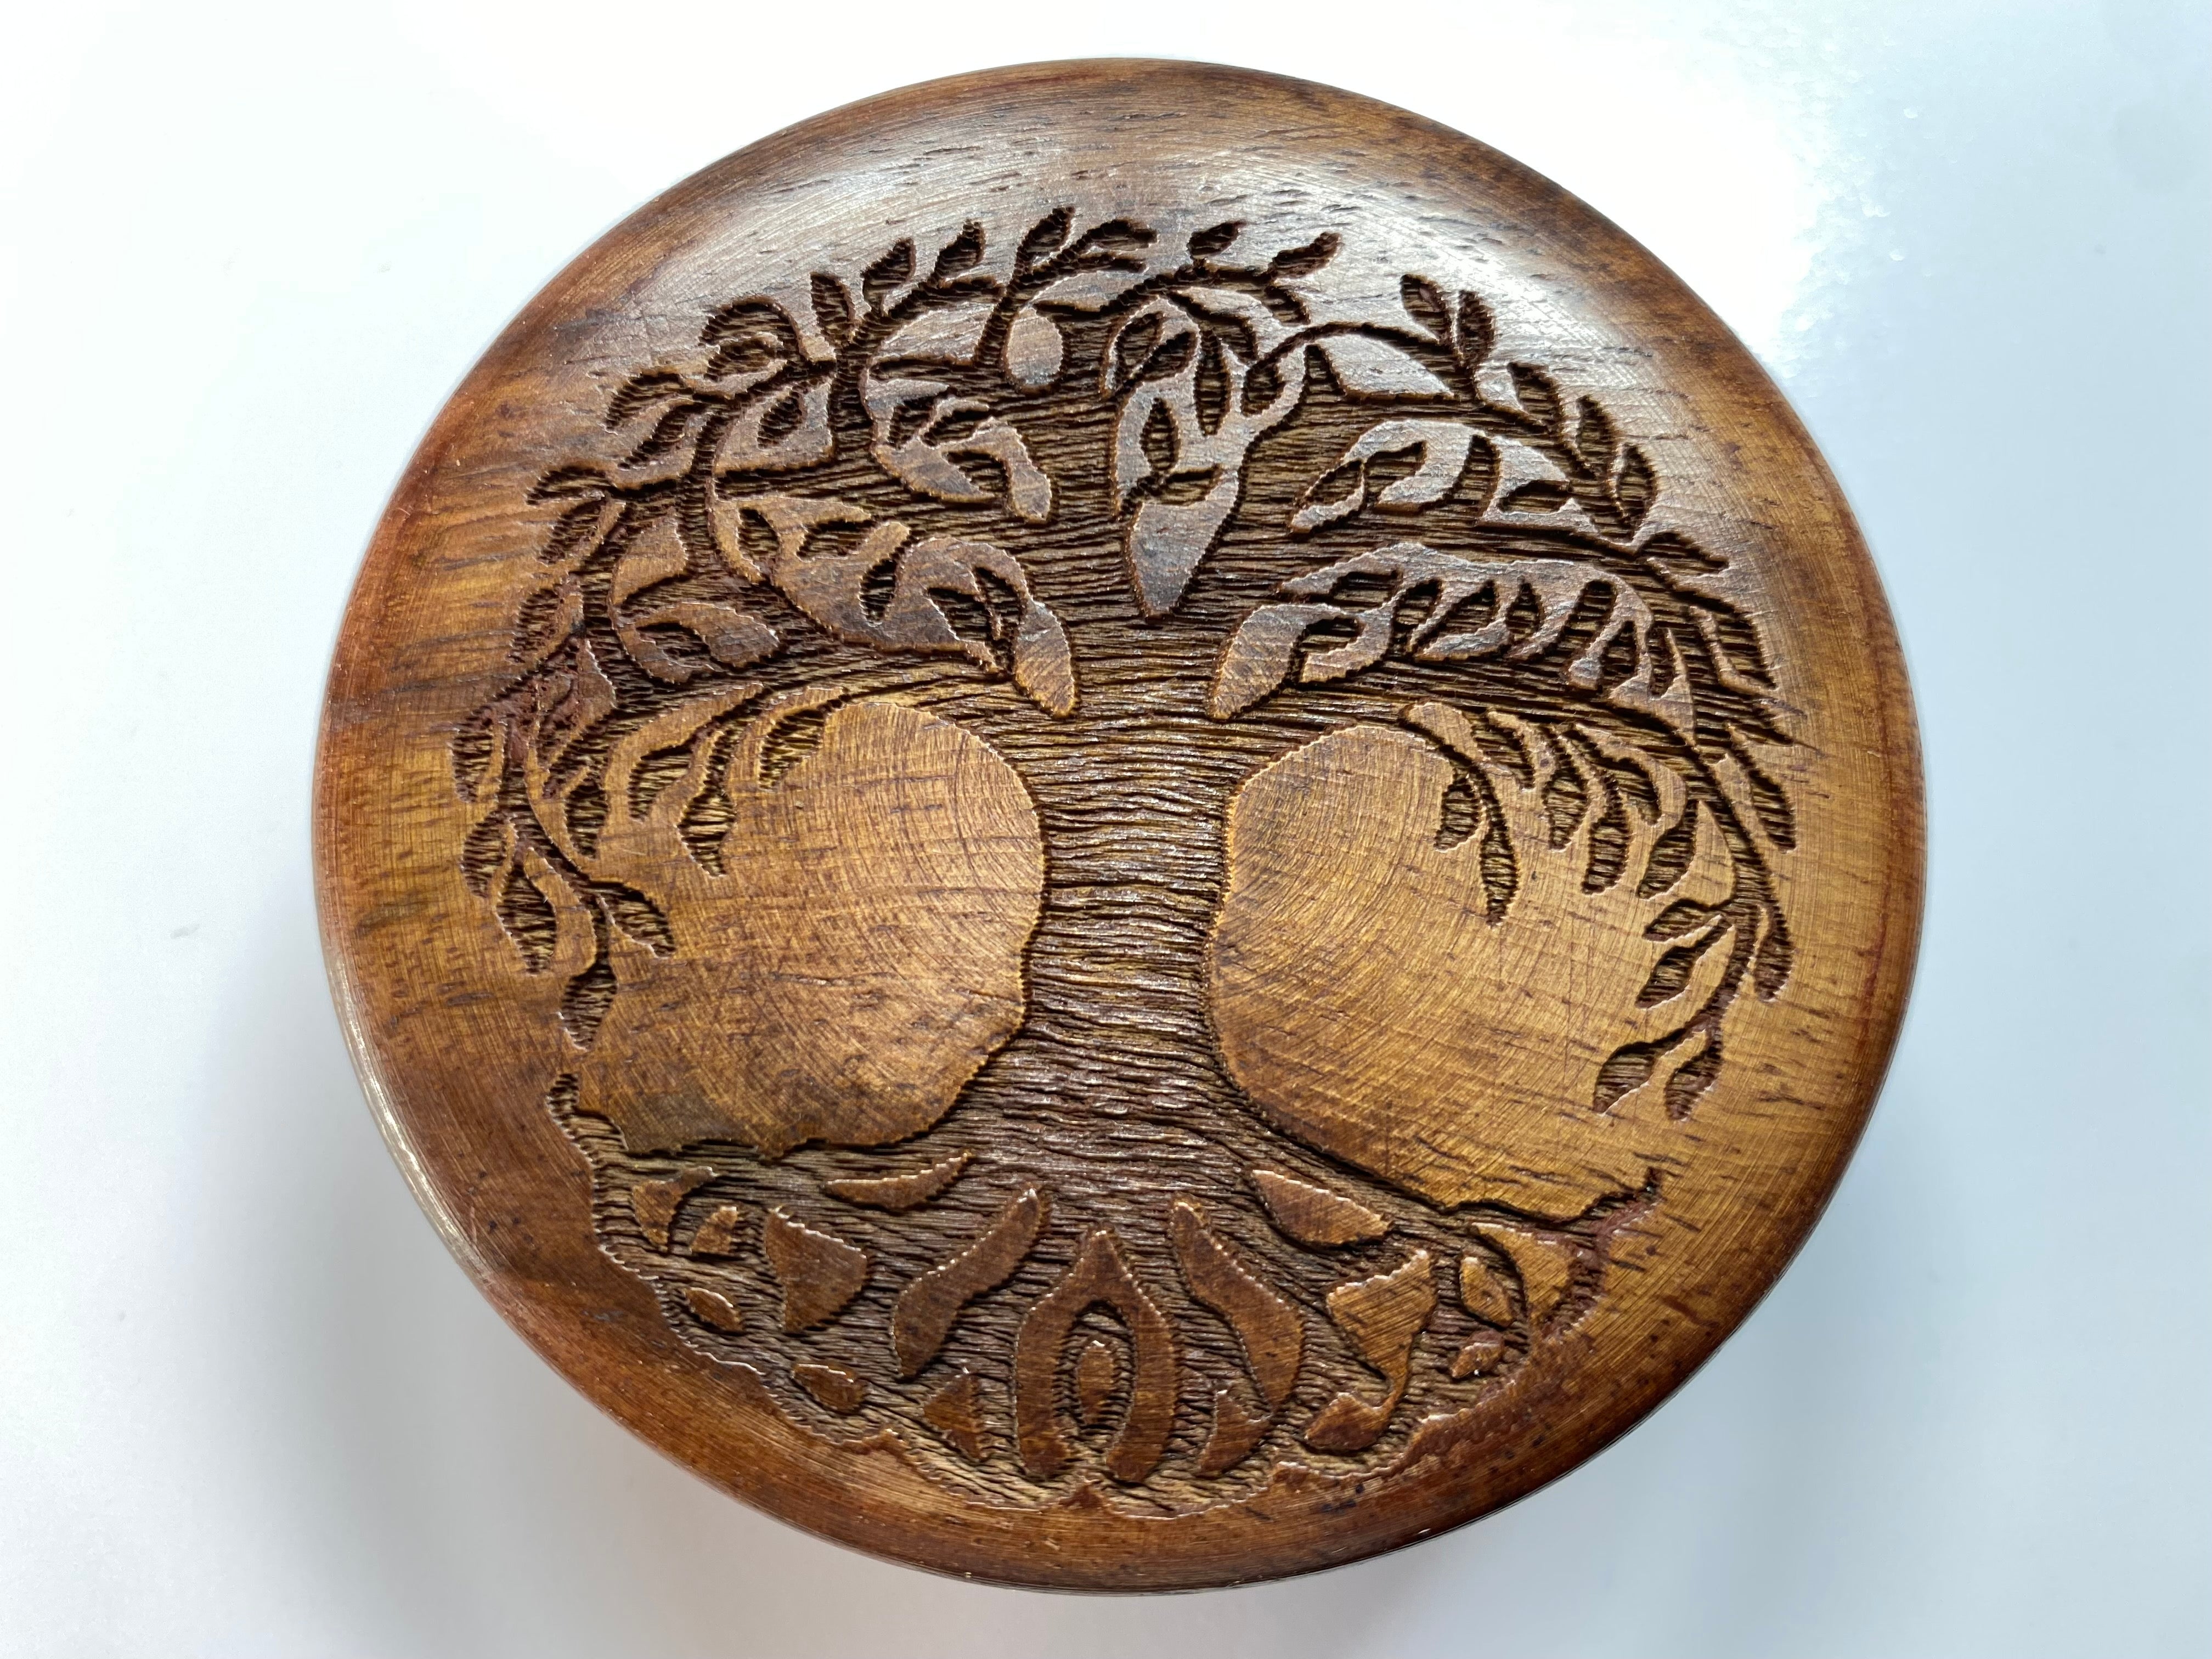 tree of life herb grinder, tree of life herb grinder Suppliers and  Manufacturers at